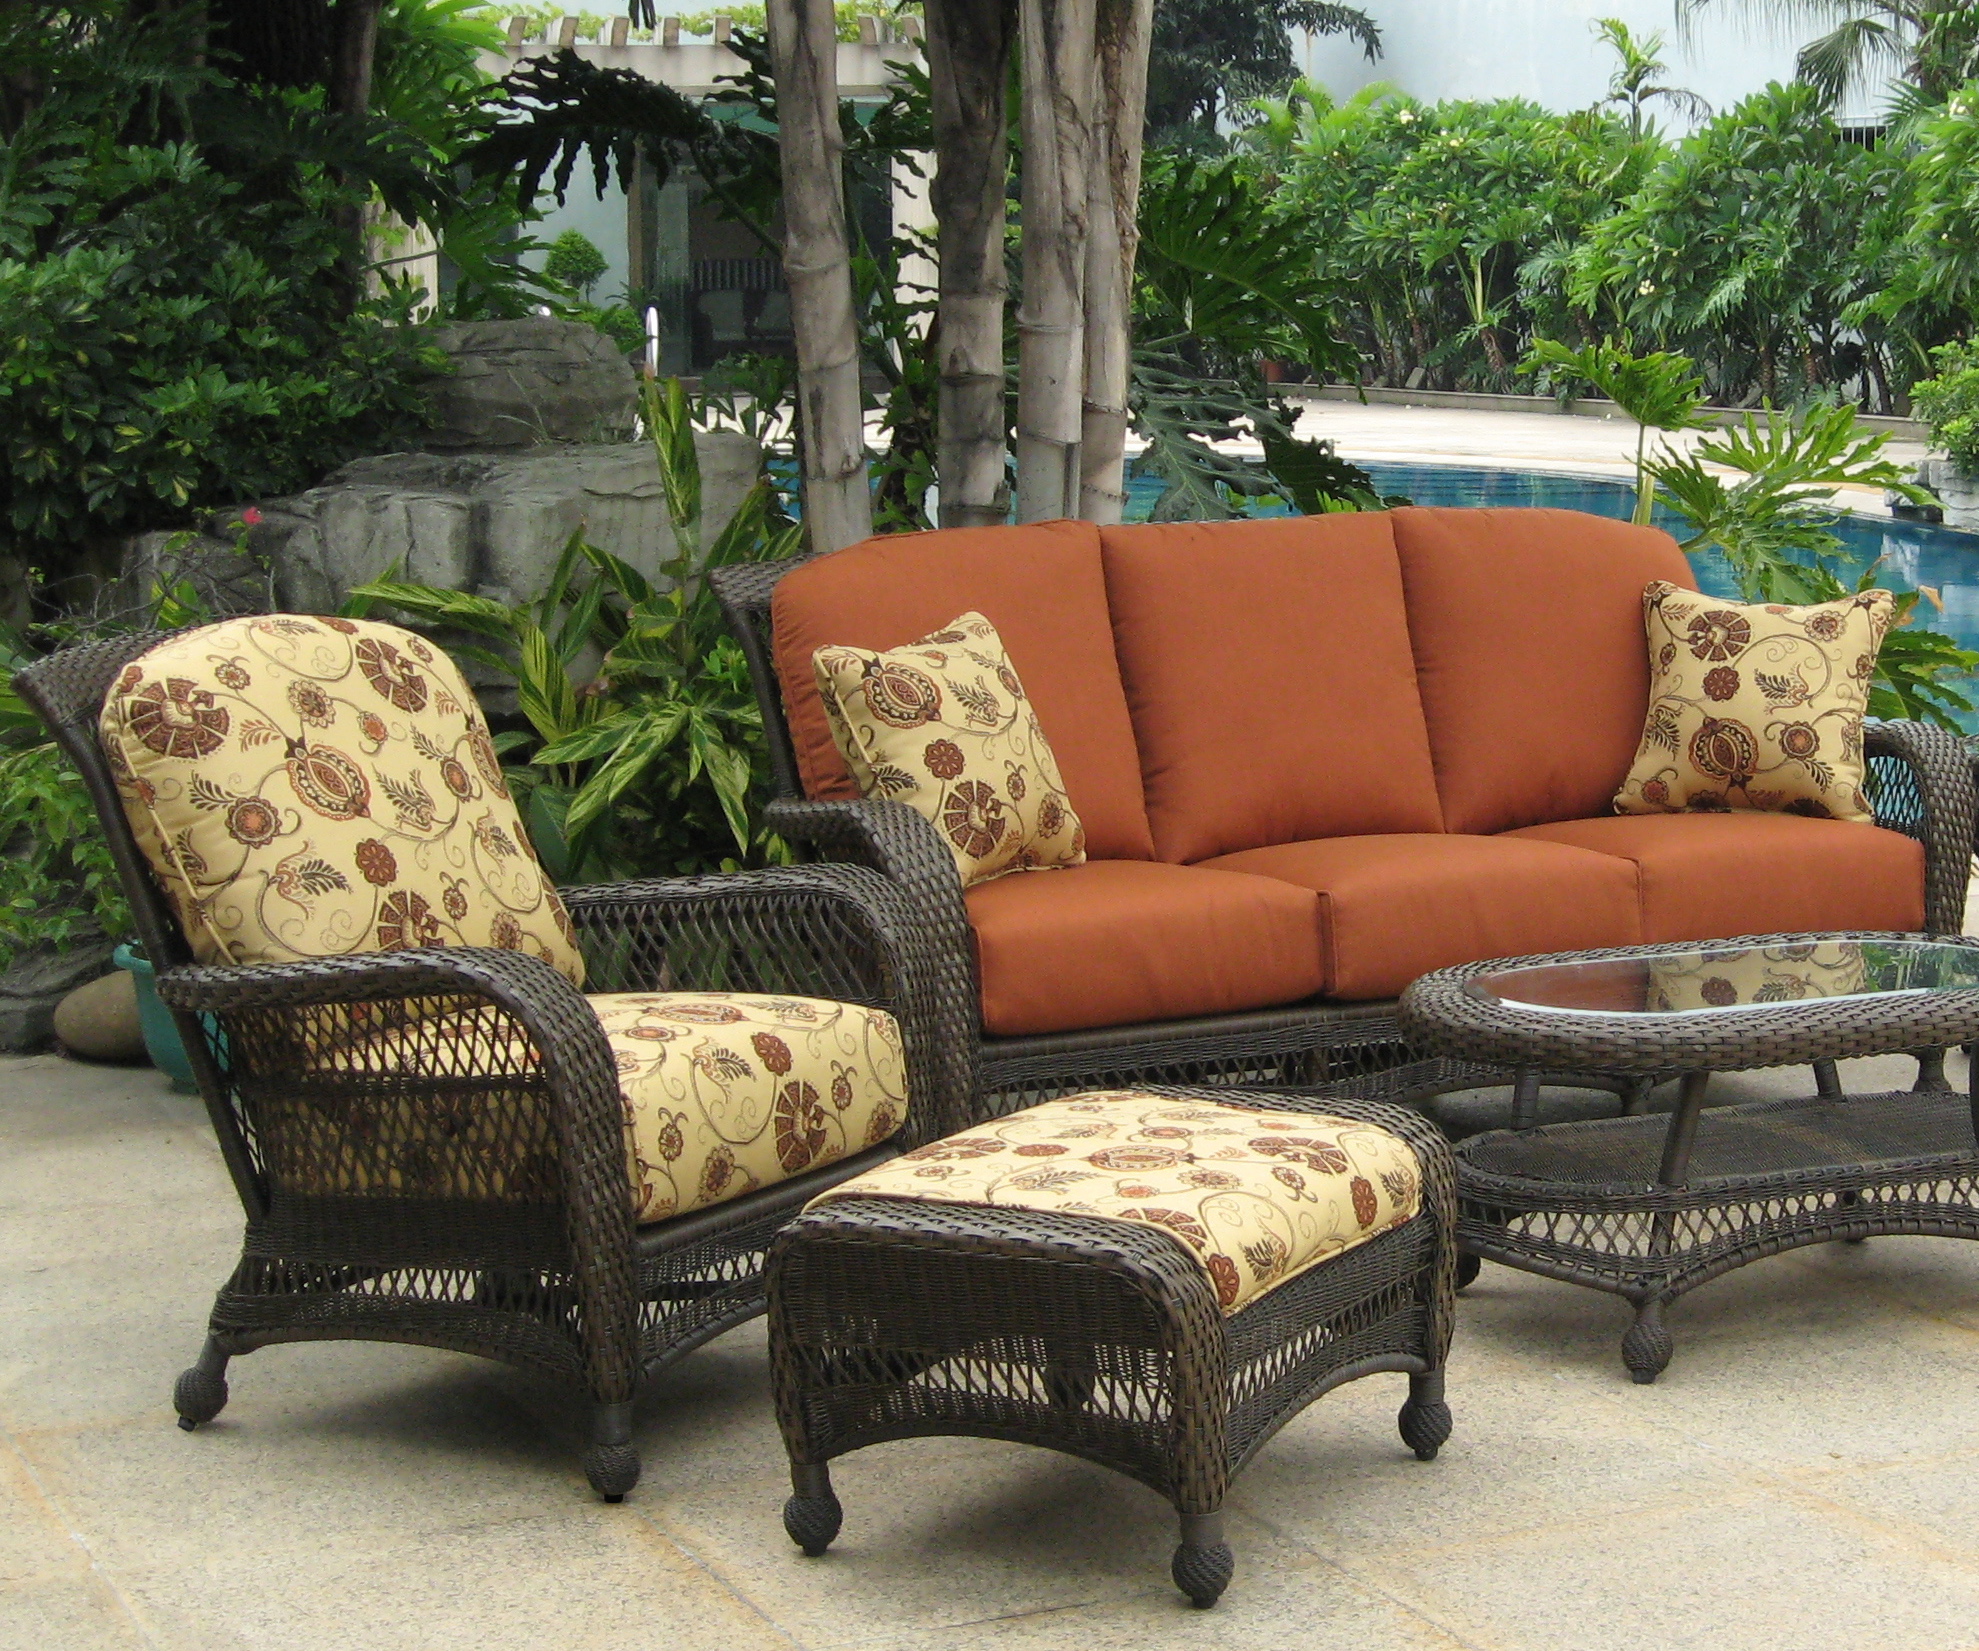 GRAND CYPRESS COLLECTION – PATIO SET BILLBOARD-image